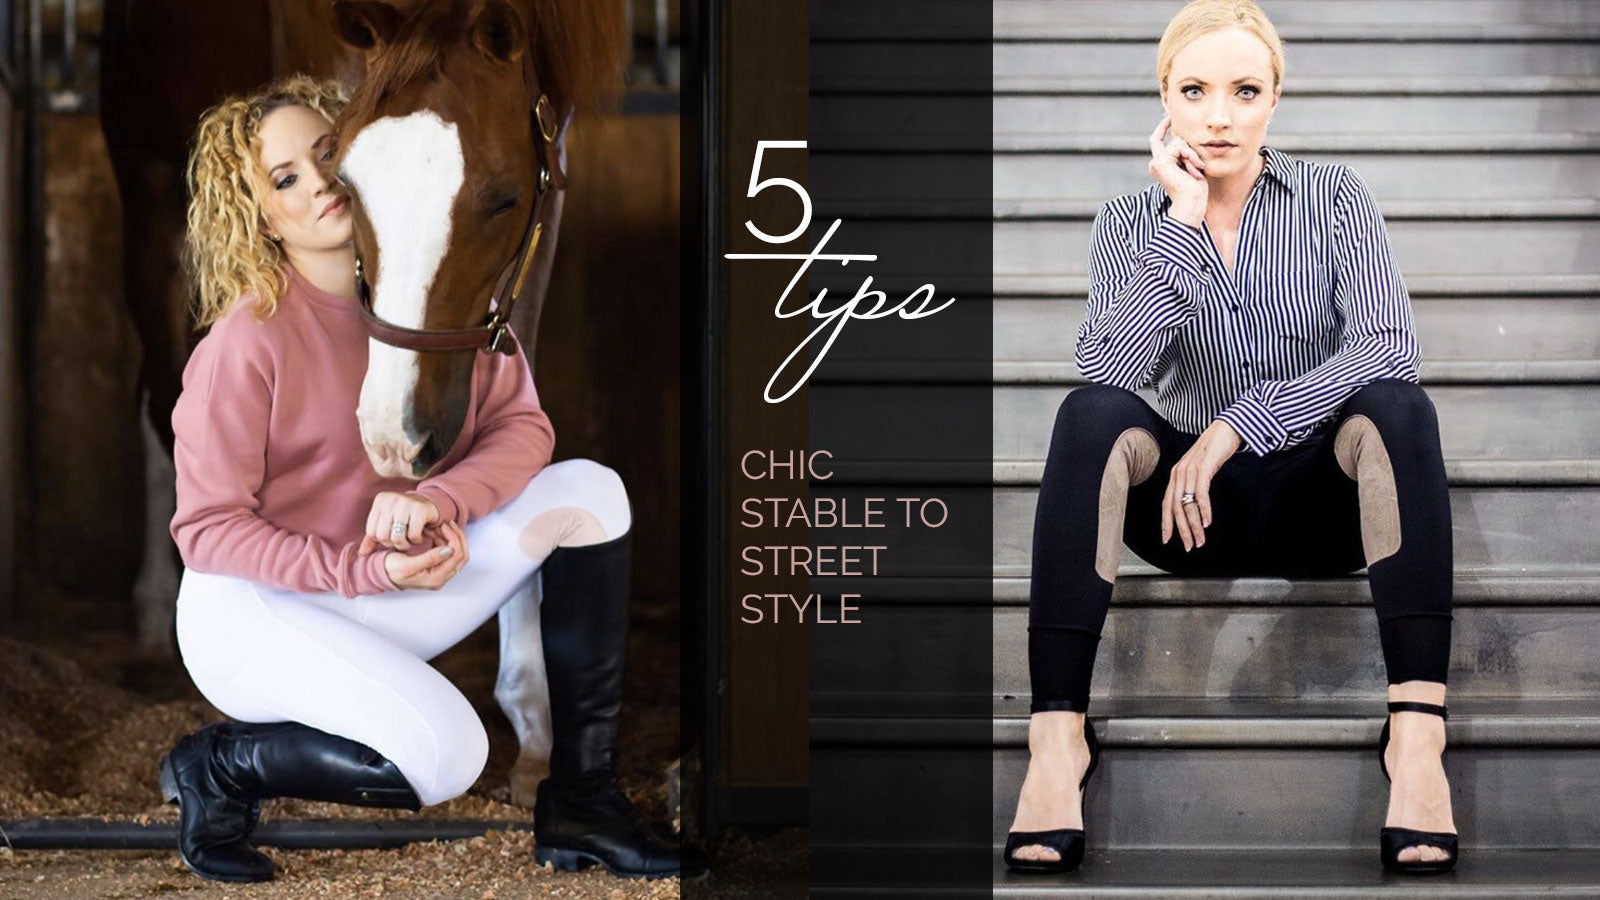 Joslyn's stable to chic style tips